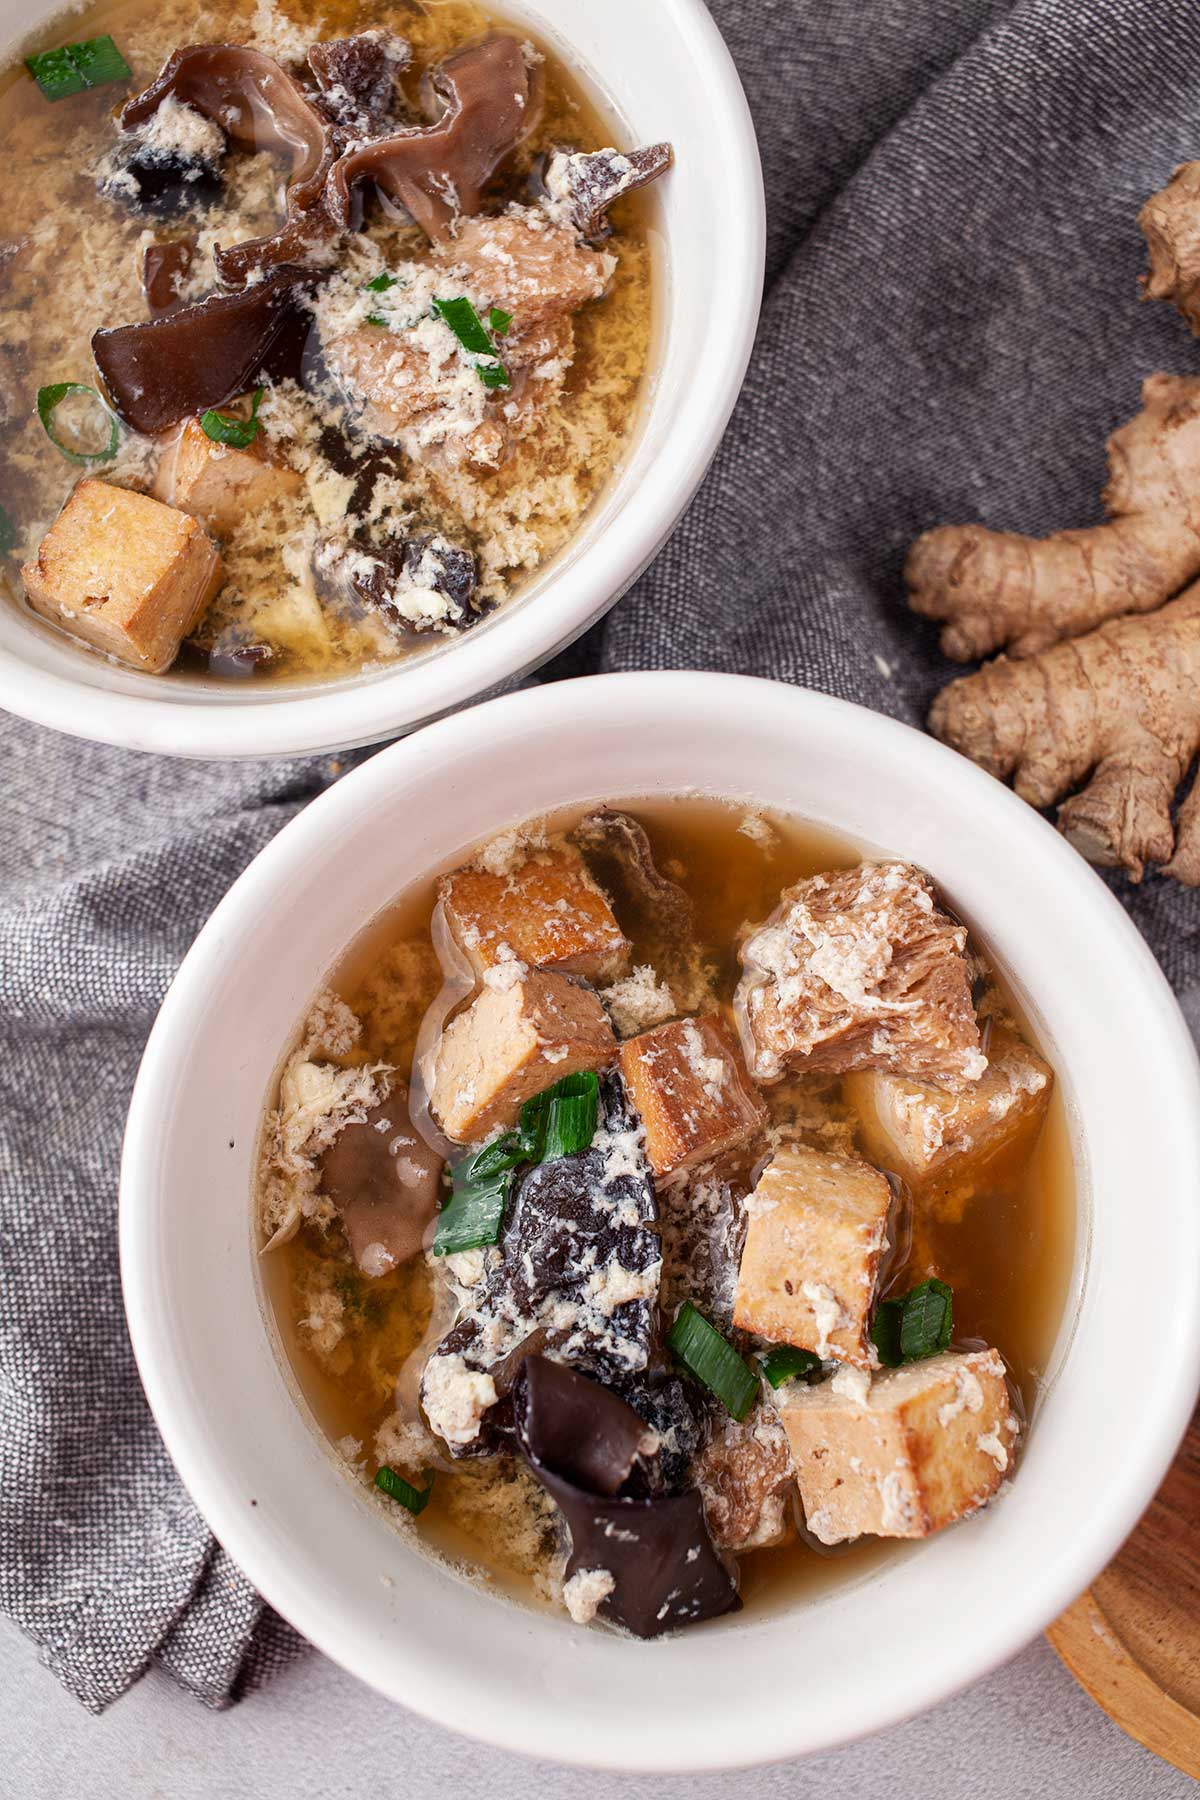 Vegetarian Hot and Sour Soup with Tofu